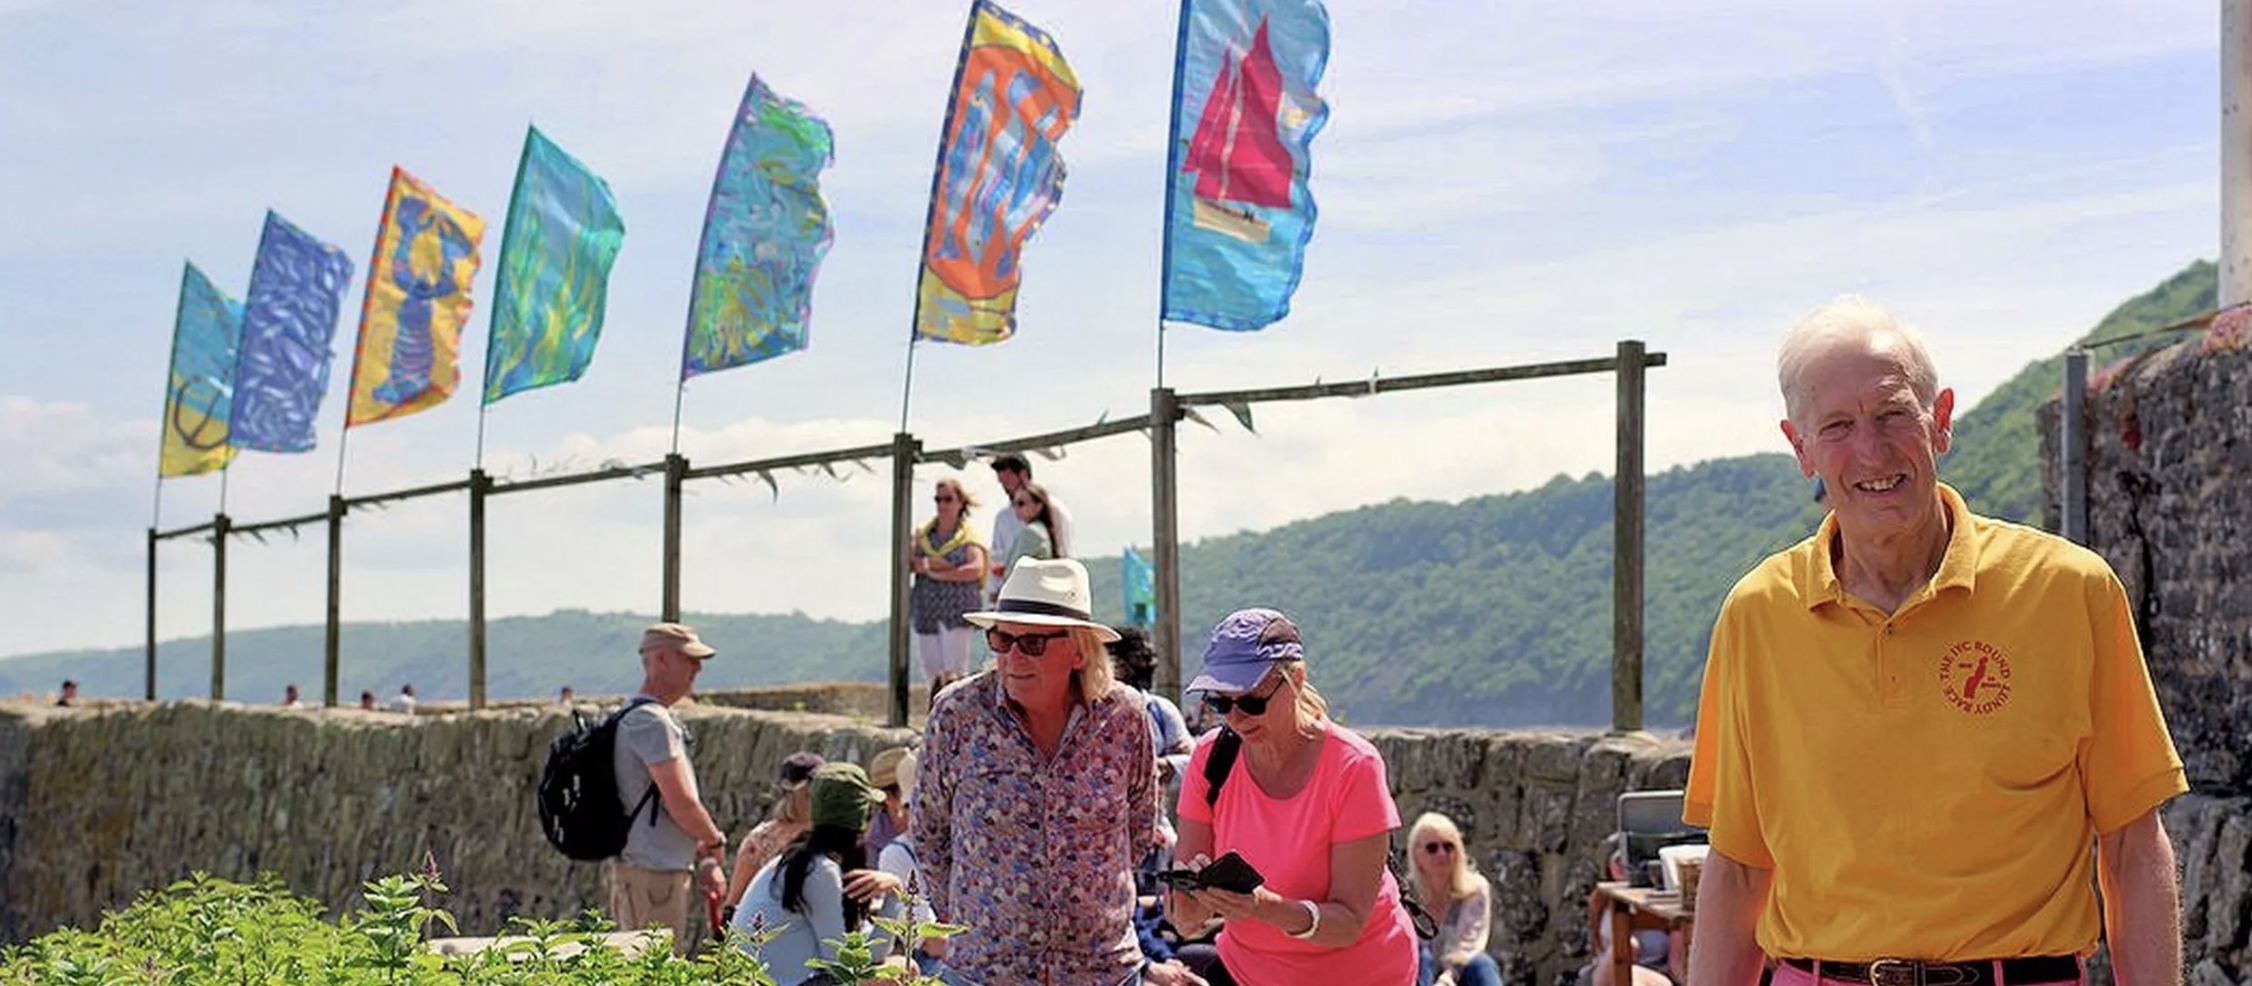 “Clovelly’s Seaweed Festival makes a splash with artisan delights and beachside fun” – Devon Live